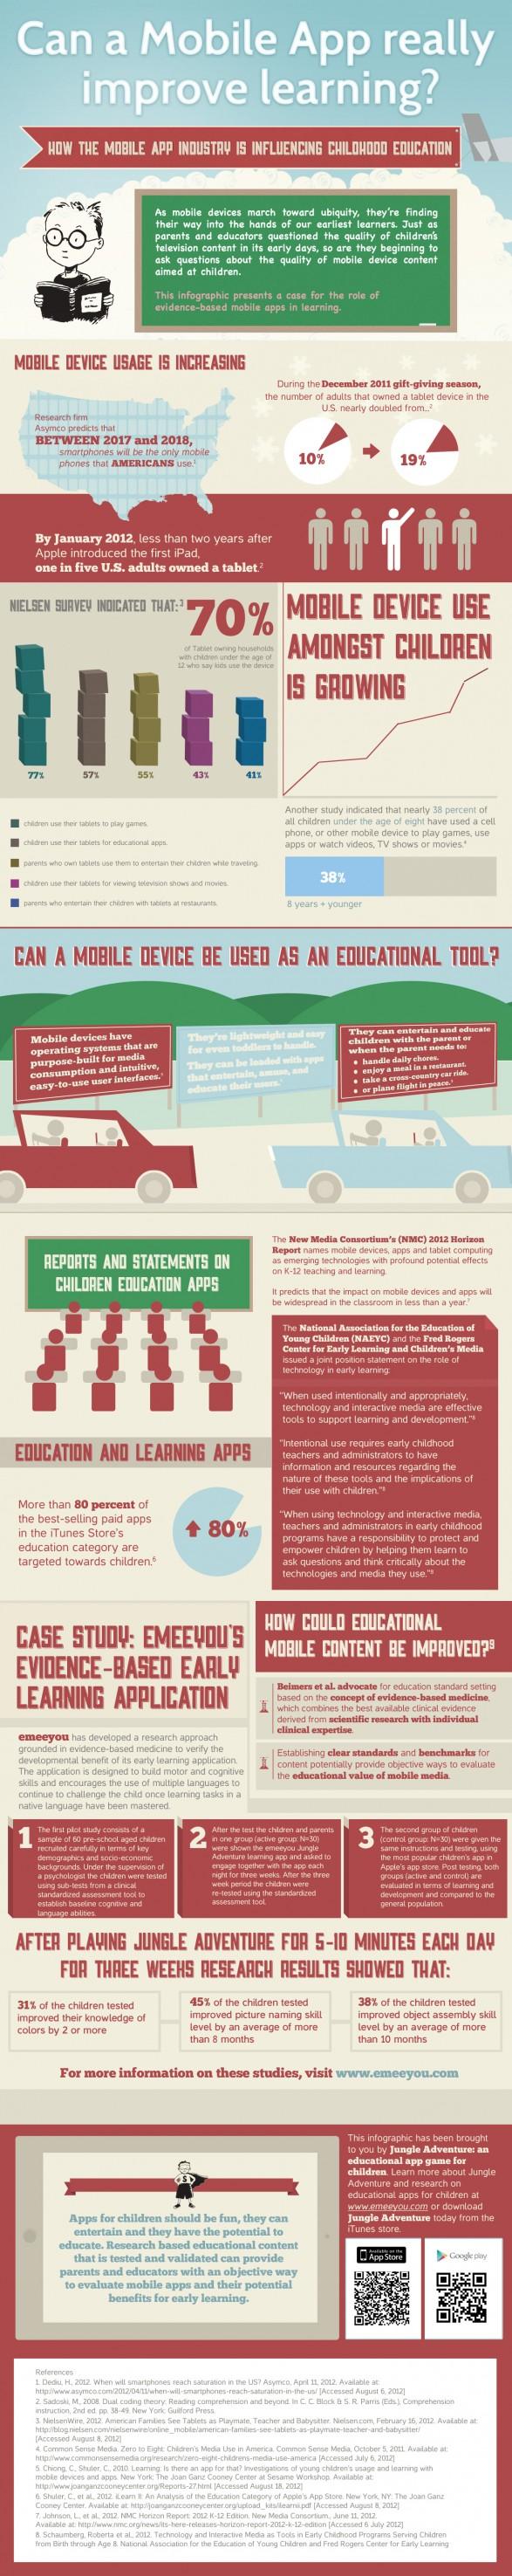 Infographic-how-mobile-apps-influence-childhood-education